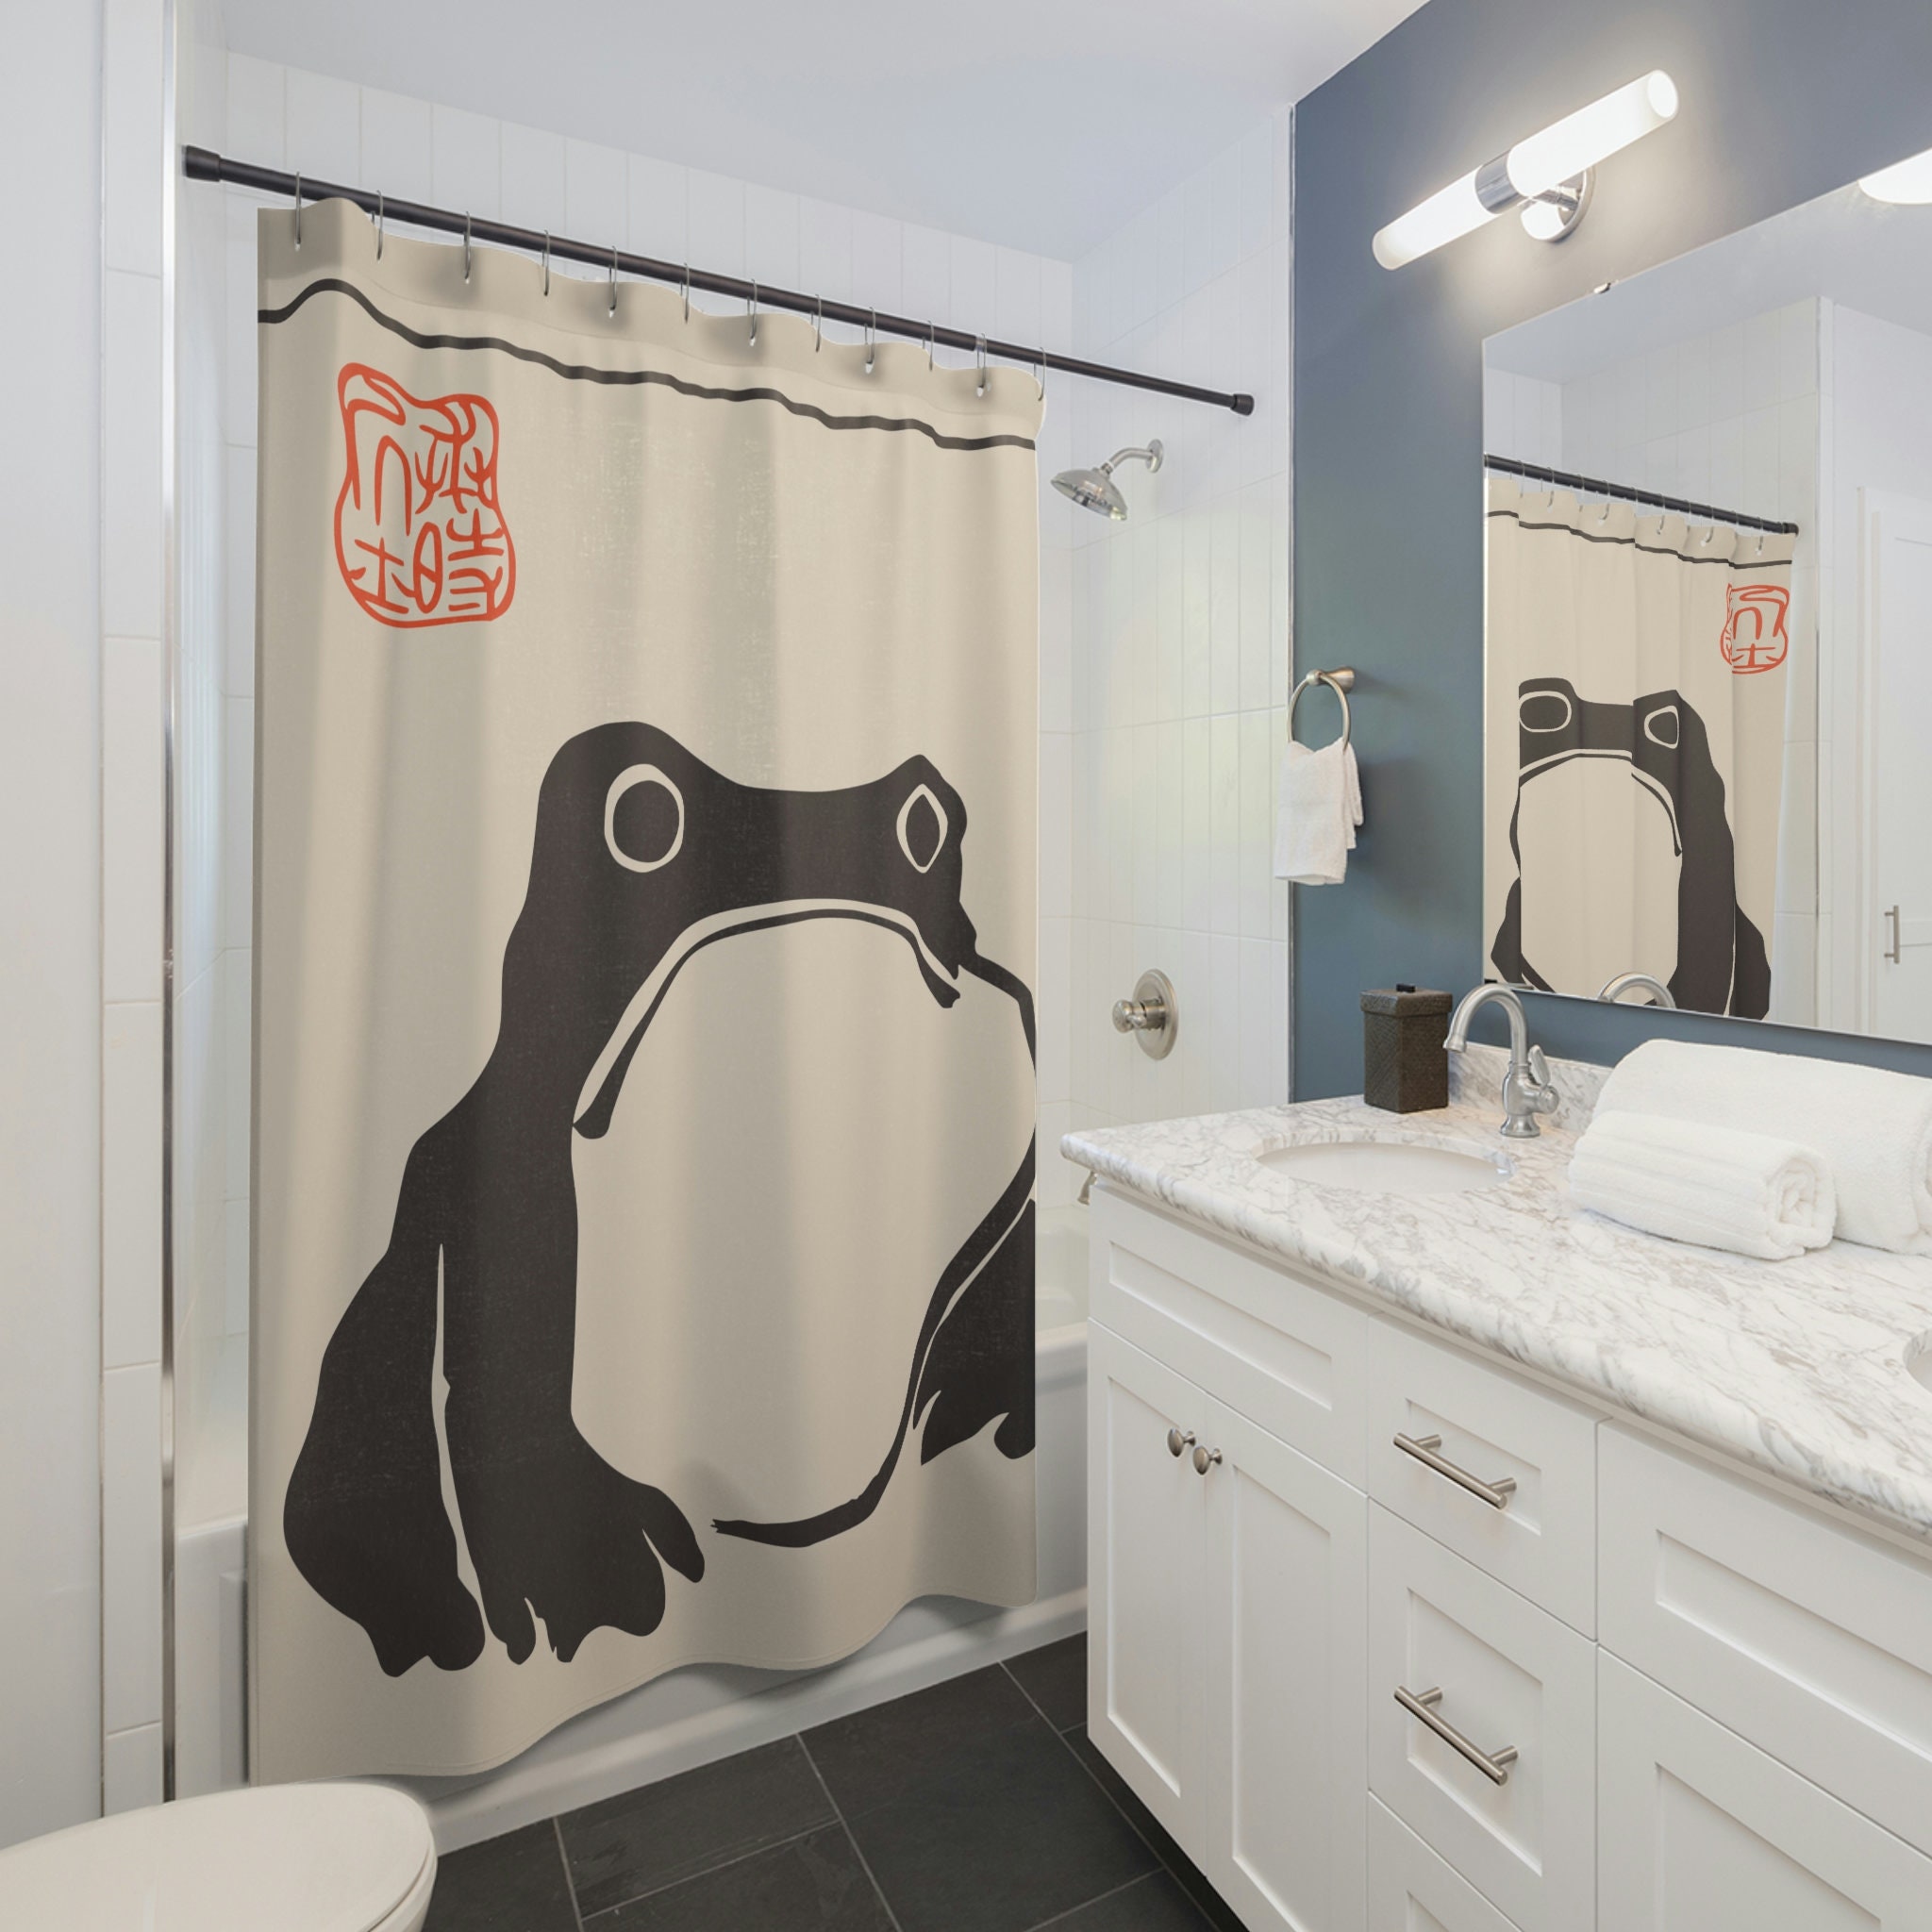 Frog Shower Curtain -  Canada